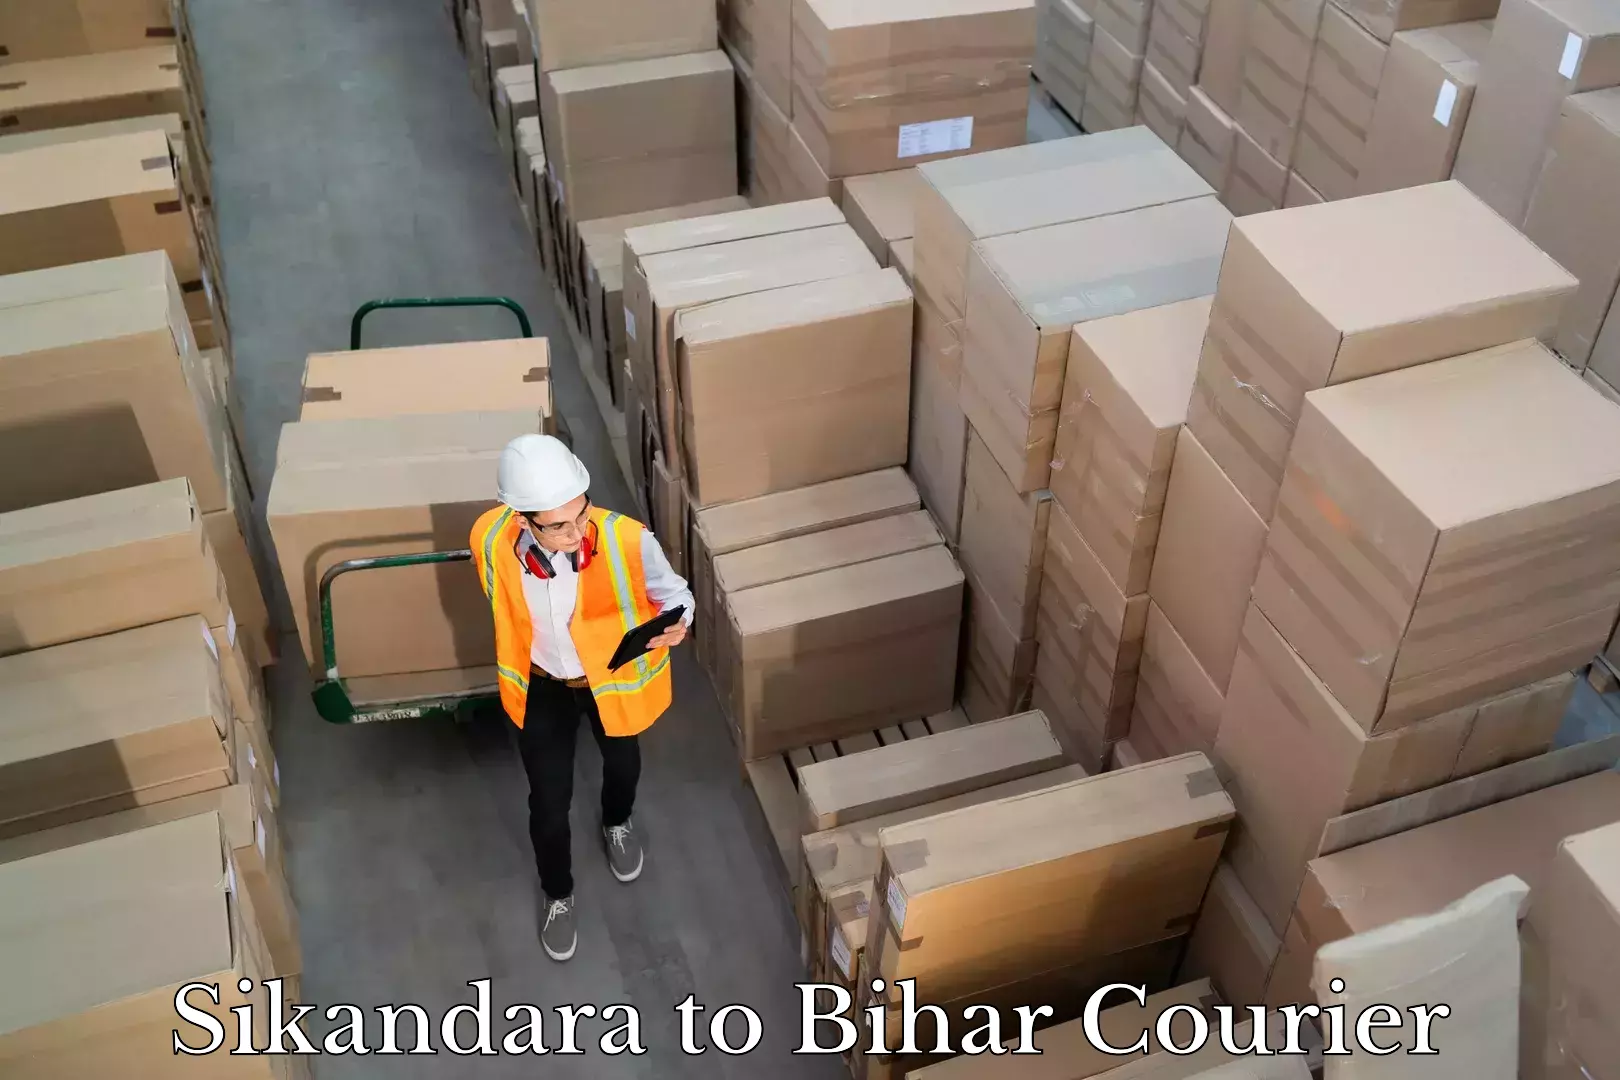 Residential courier service in Sikandara to Bihar